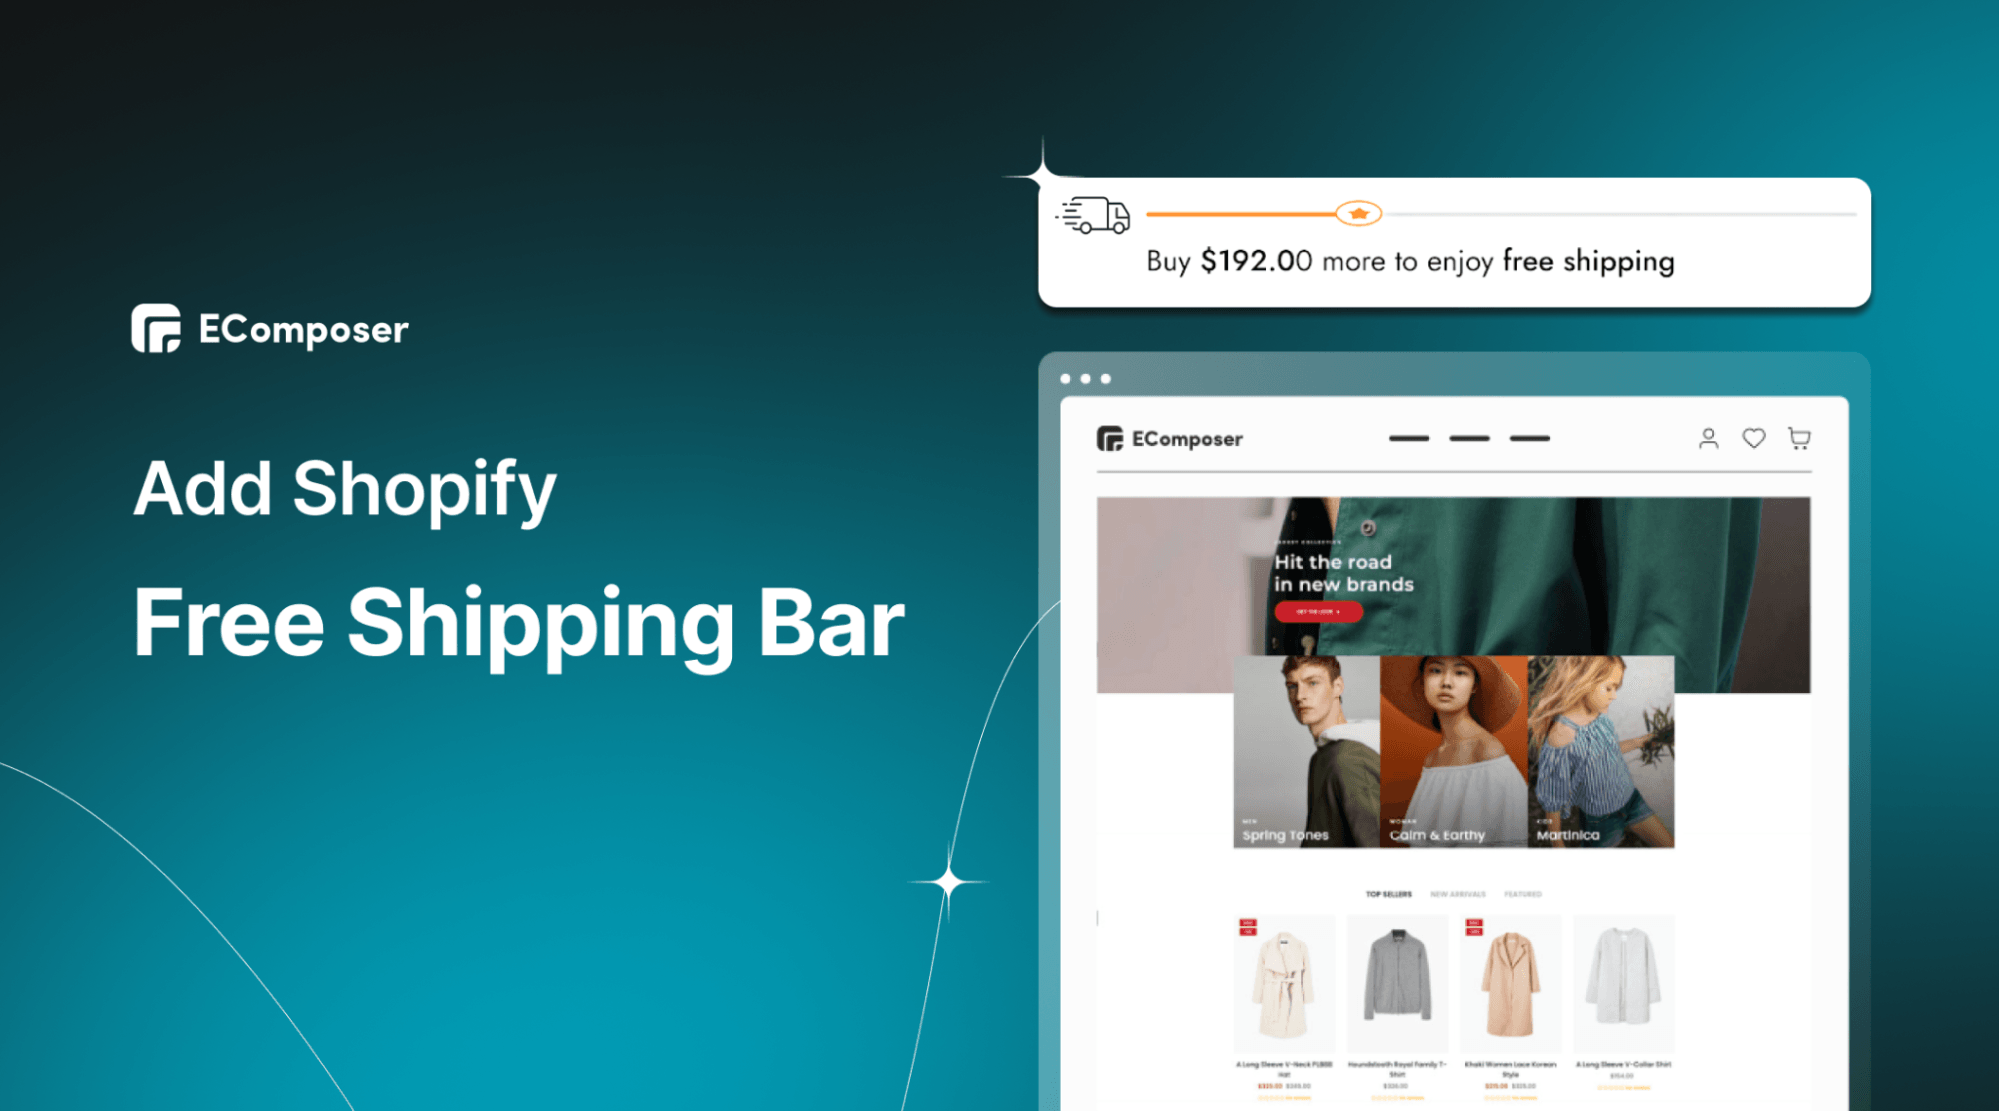 6 Creative Free Shipping Bar Ideas to Drive More Sales